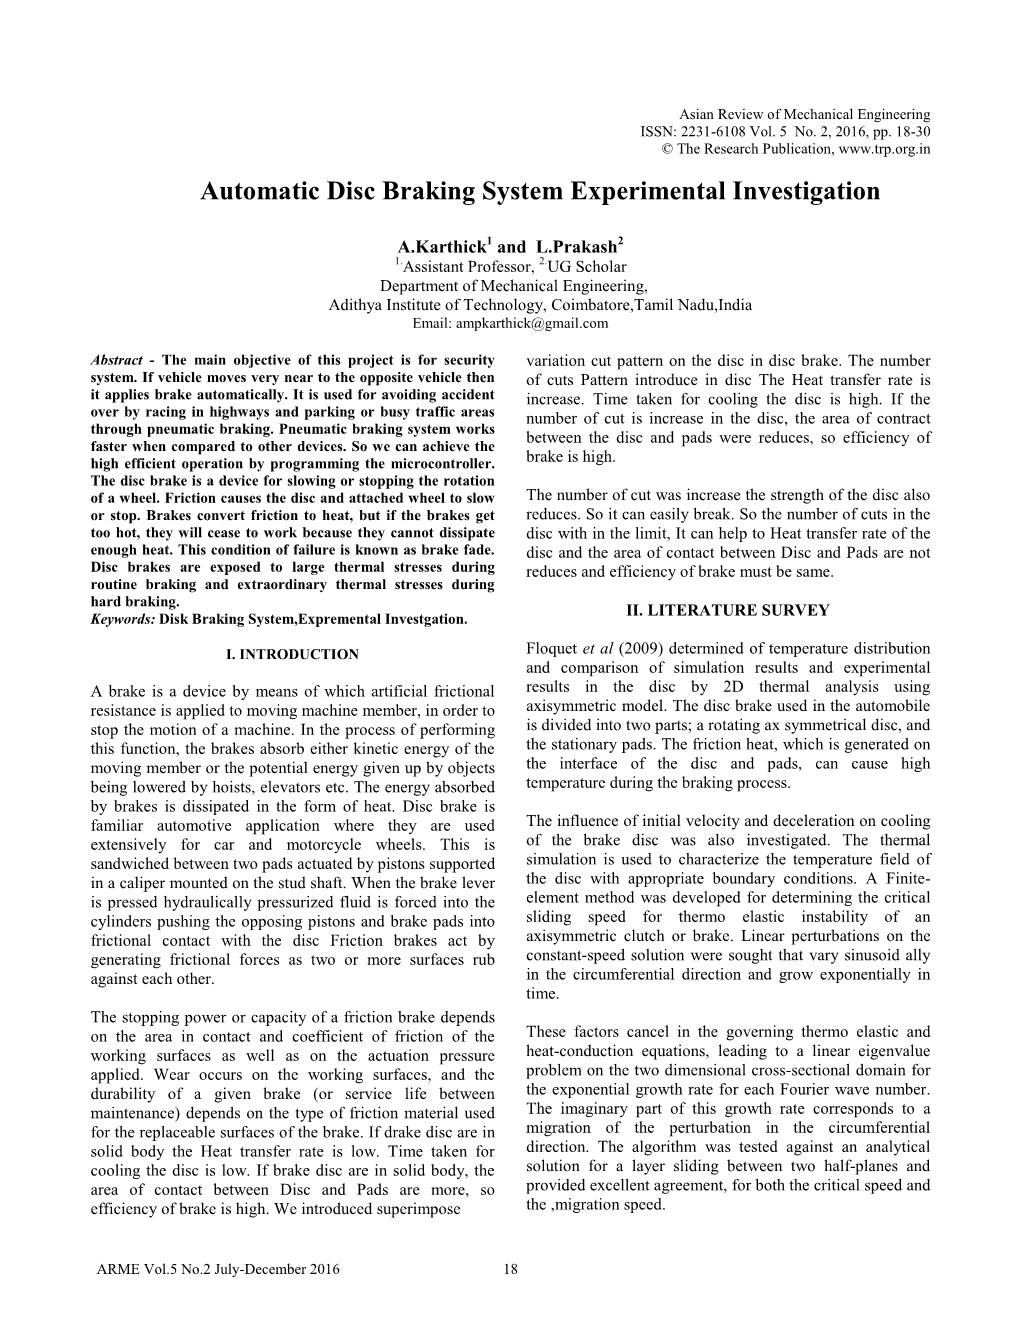 Automatic Disc Braking System Experimental Investigation